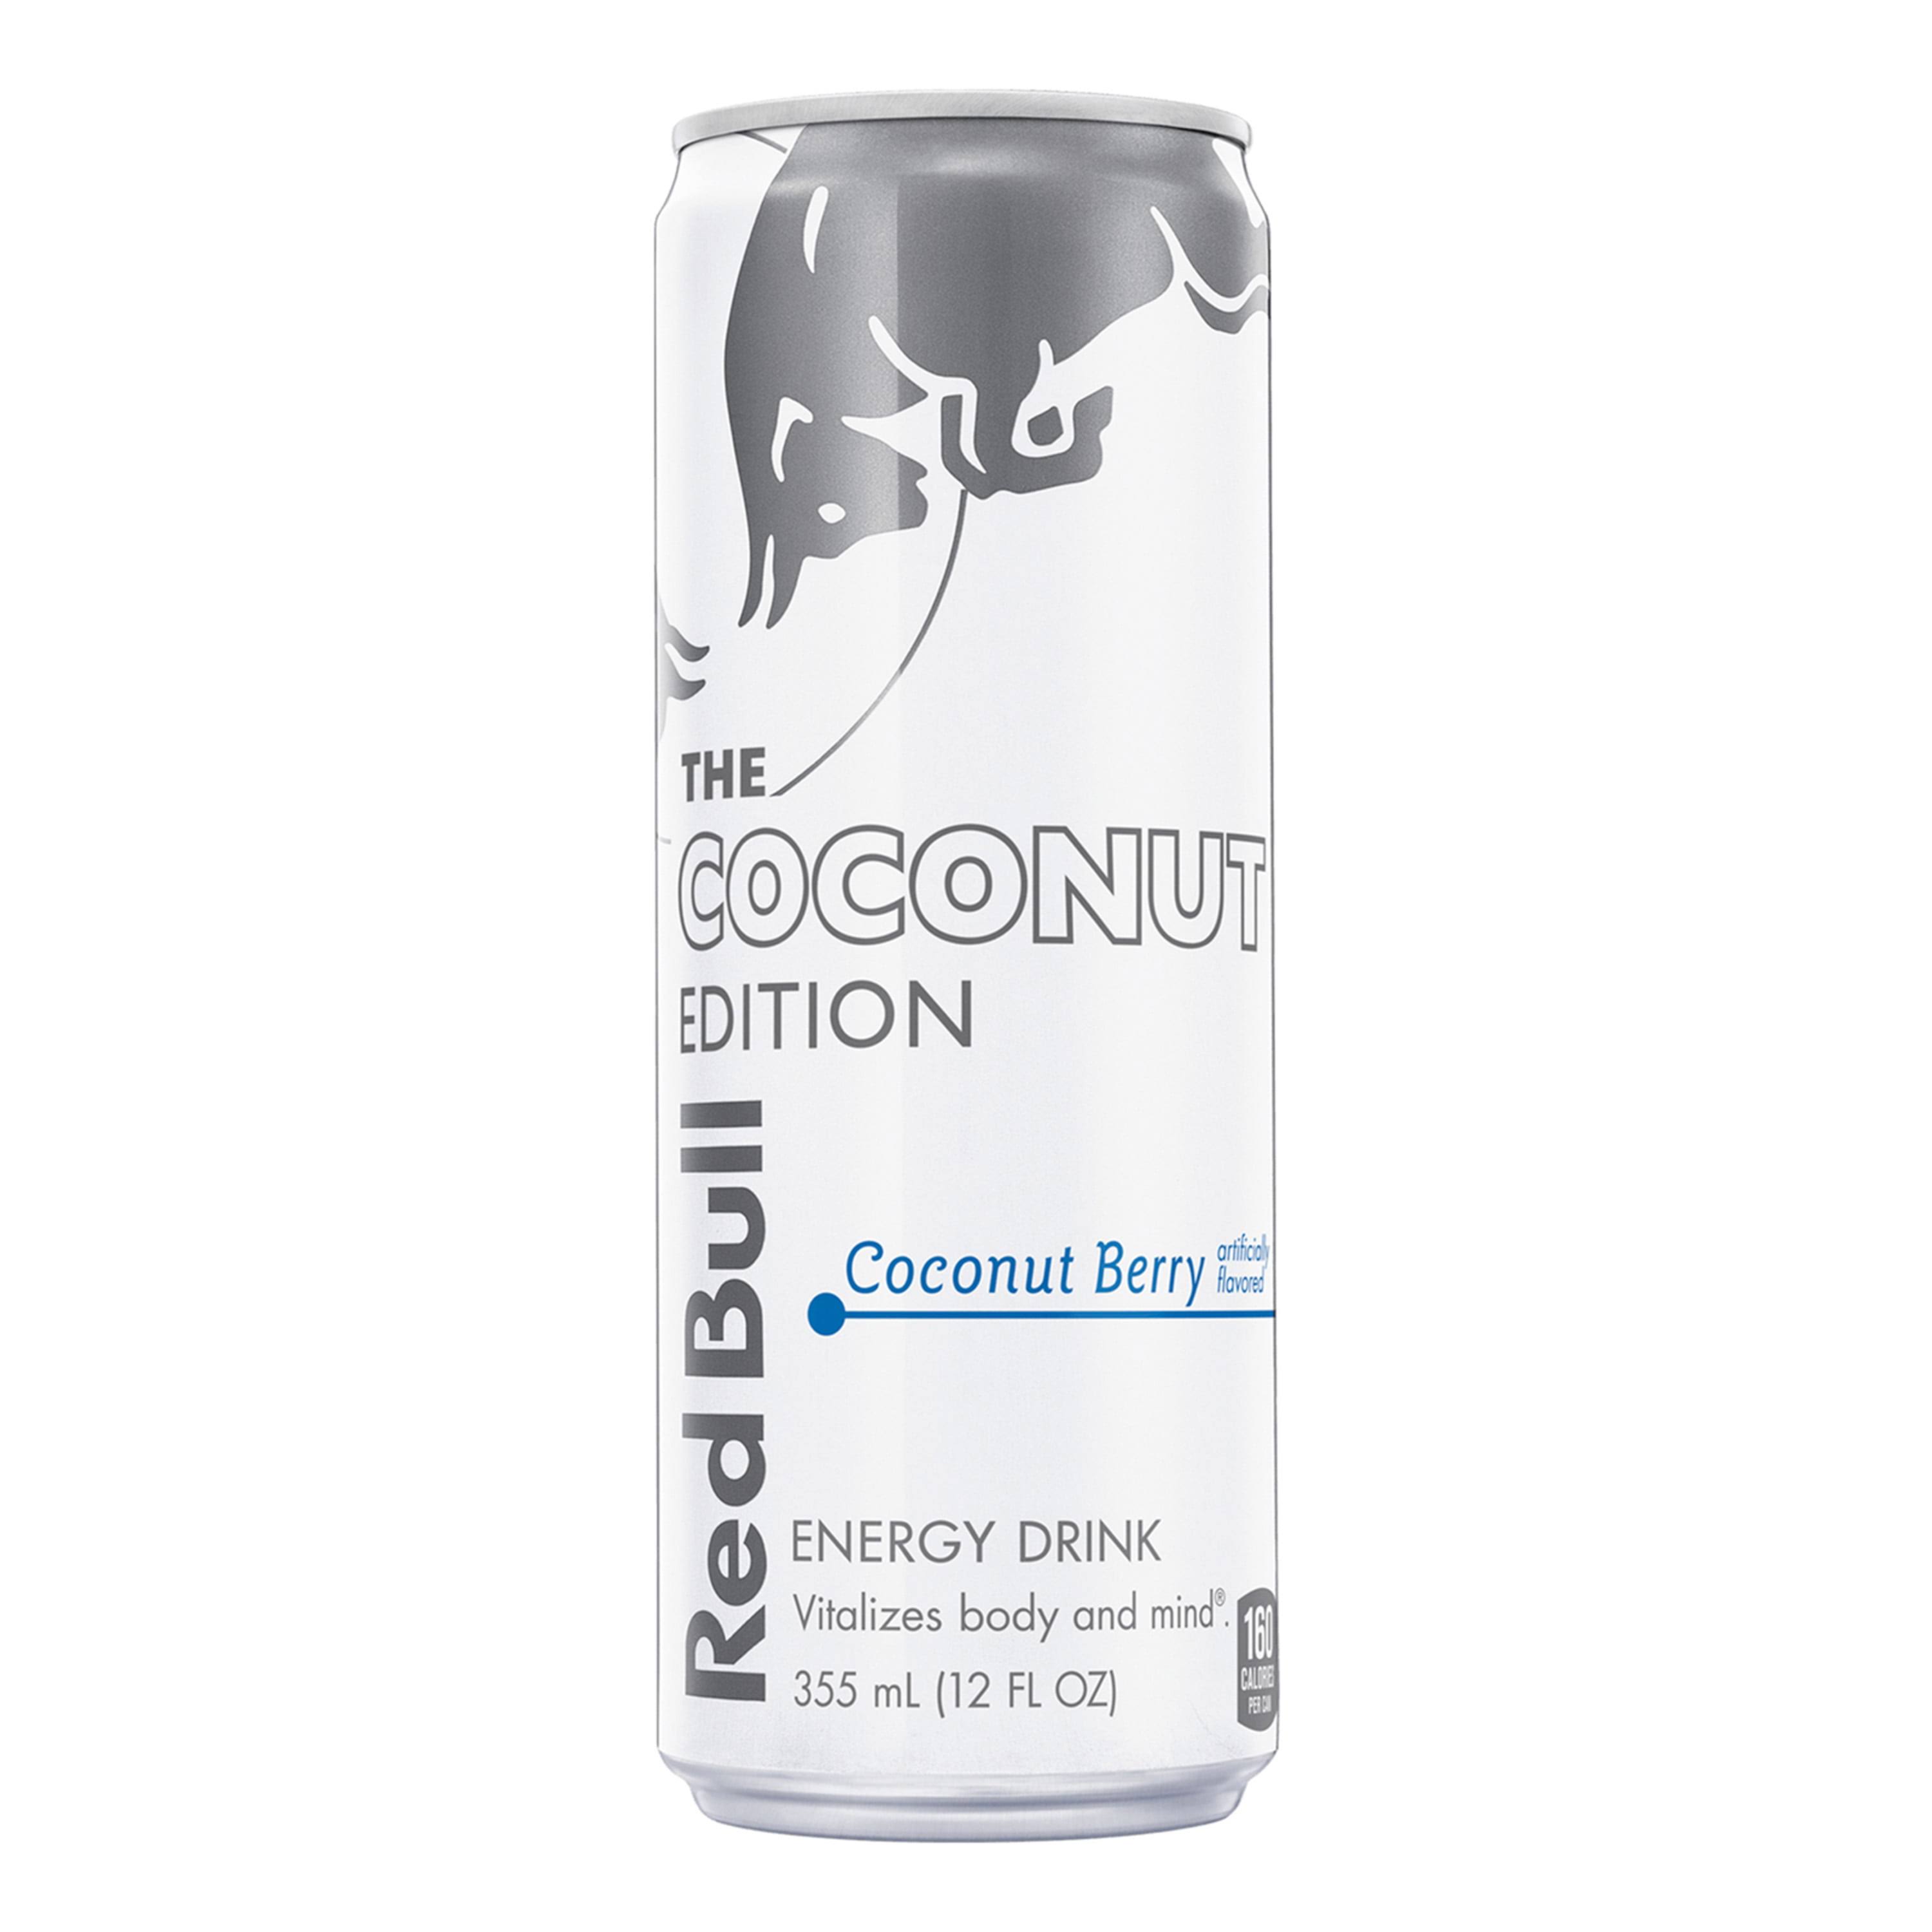 Red Bull The Coconut Edition Energy Drink, Coconut Berry - 12 fl oz